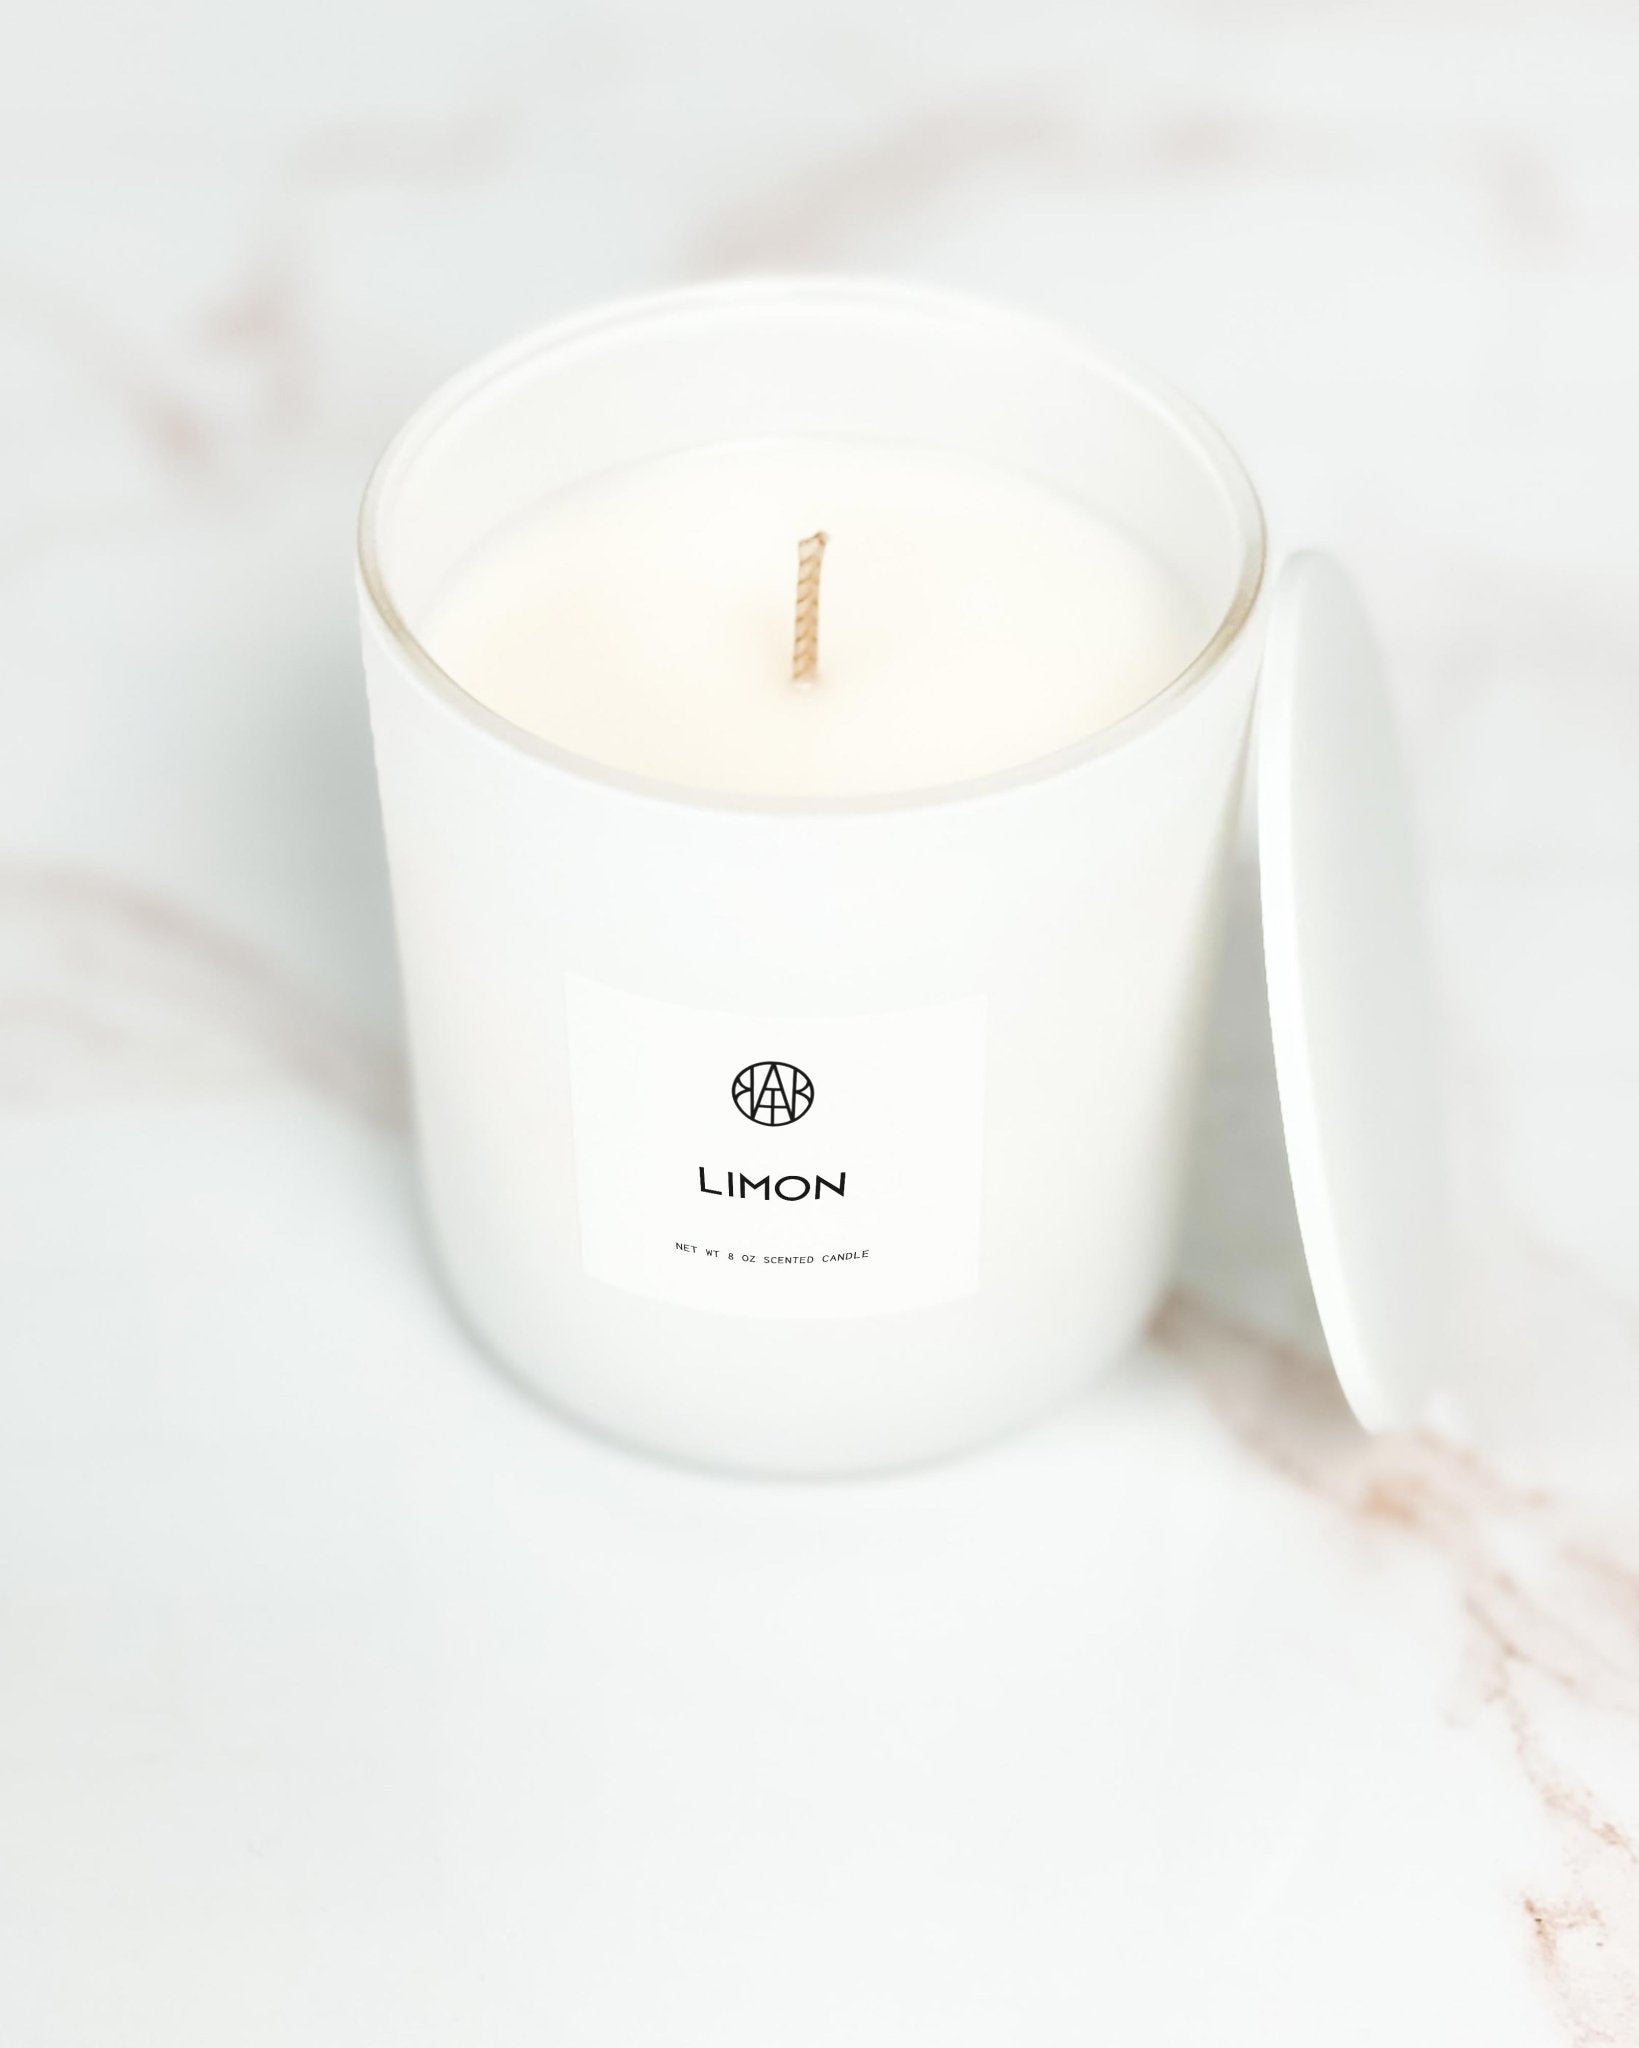 LIMON - Classic Candle - AEMBR - Clean Luxury Candles, Wax Melts & Laundry Care